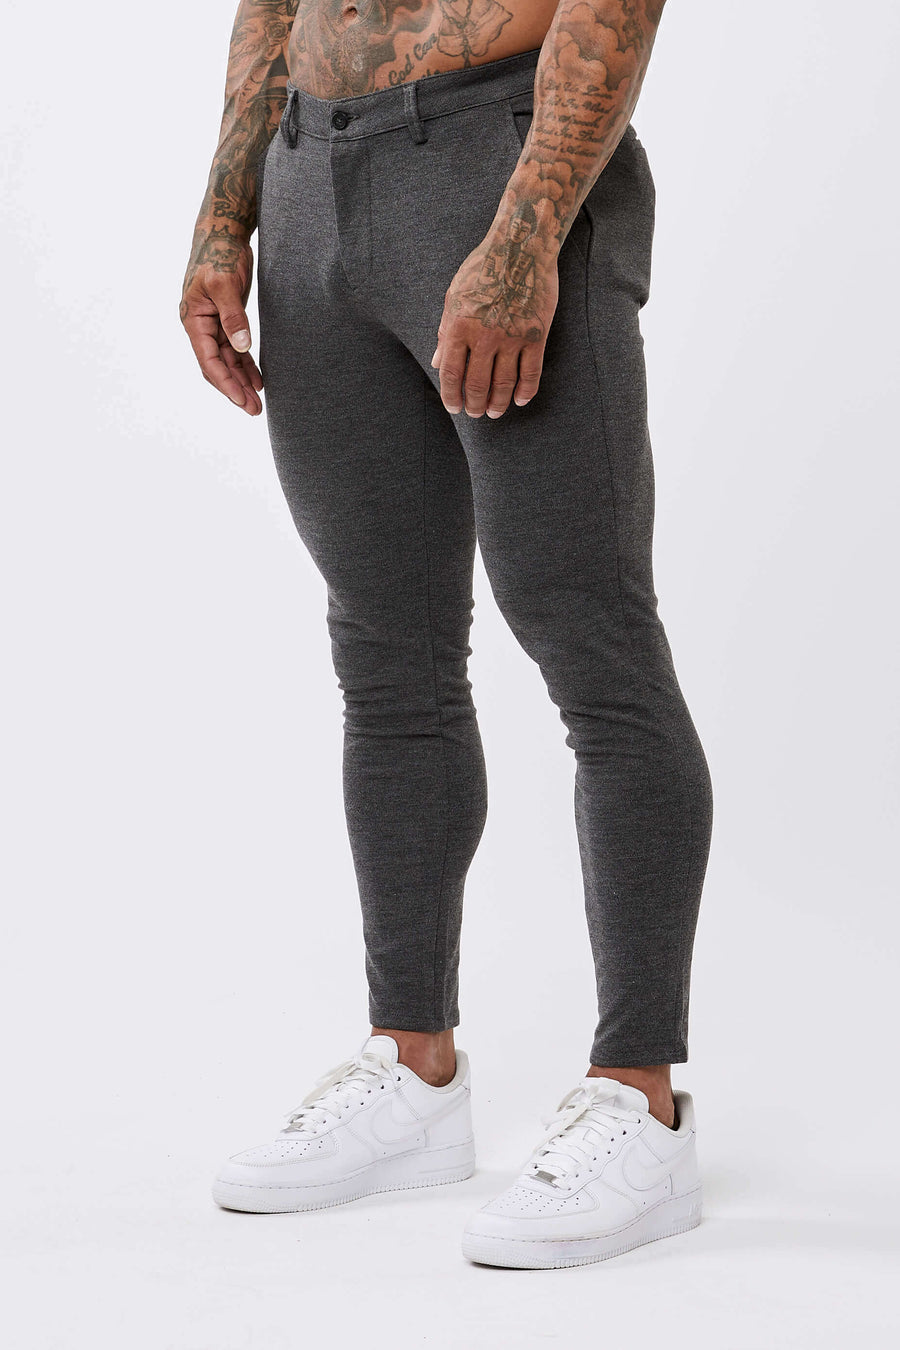 Legend London Trousers STRETCH TROUSER CHARCOAL - SPRAY-ON FIT